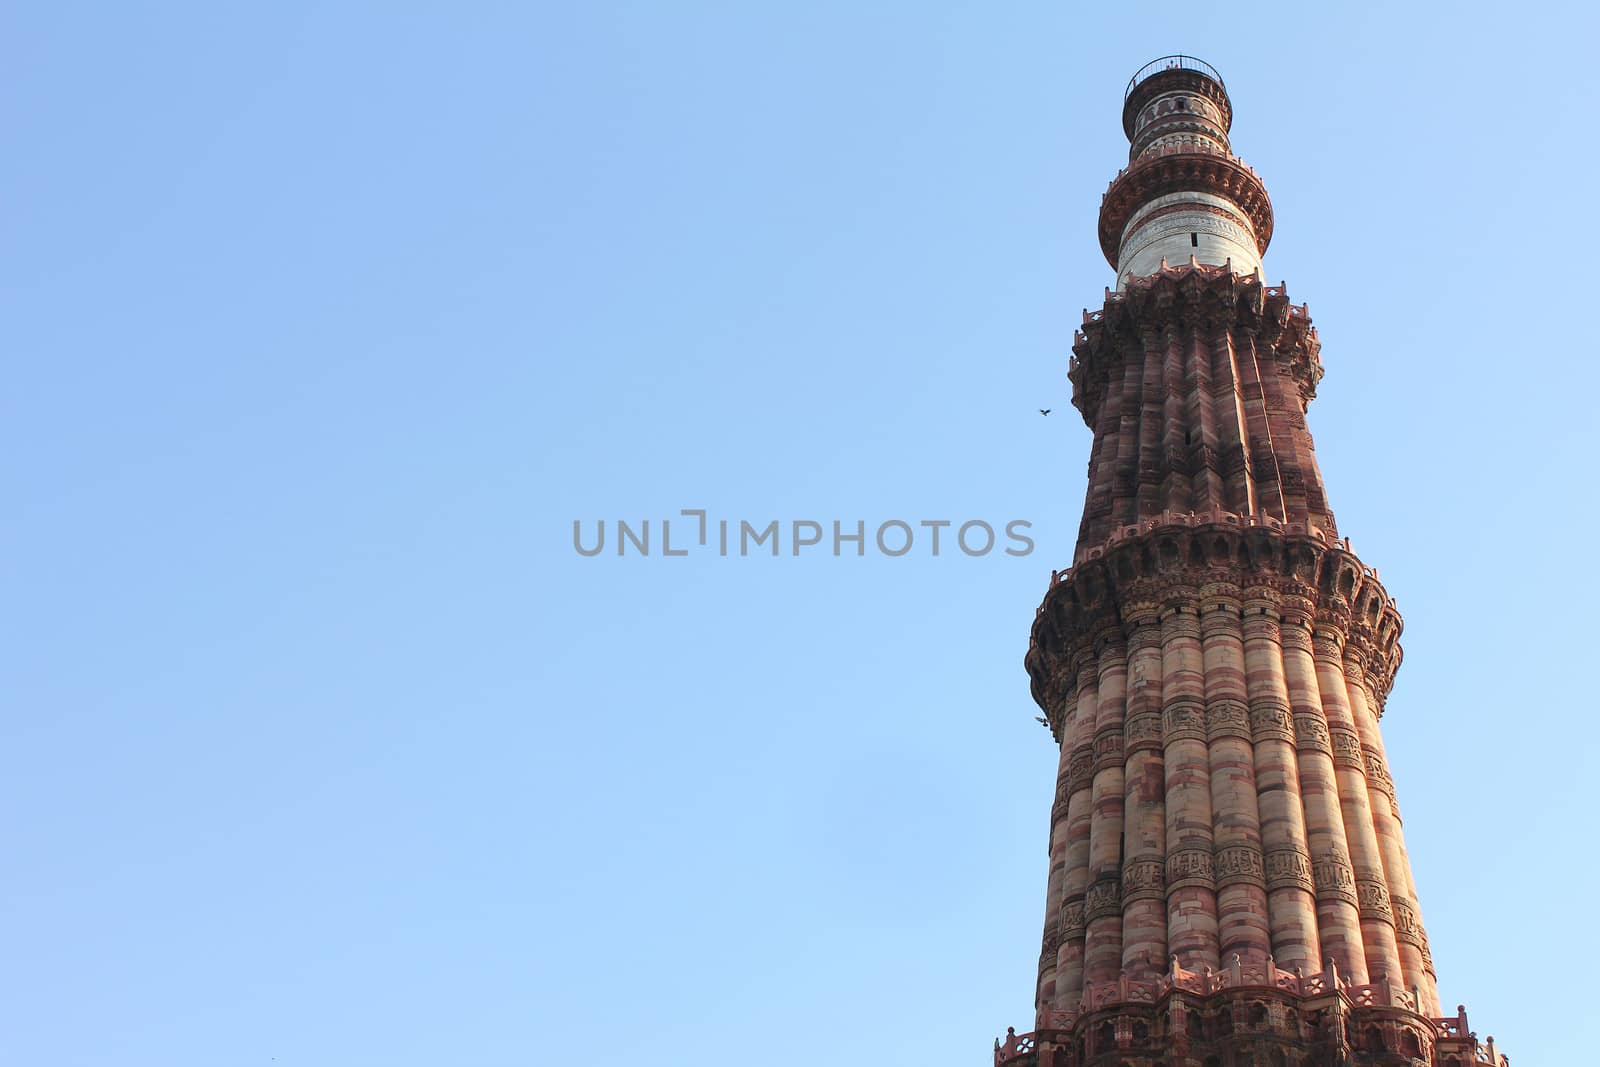 qutub minar with carving architecture in blue sky